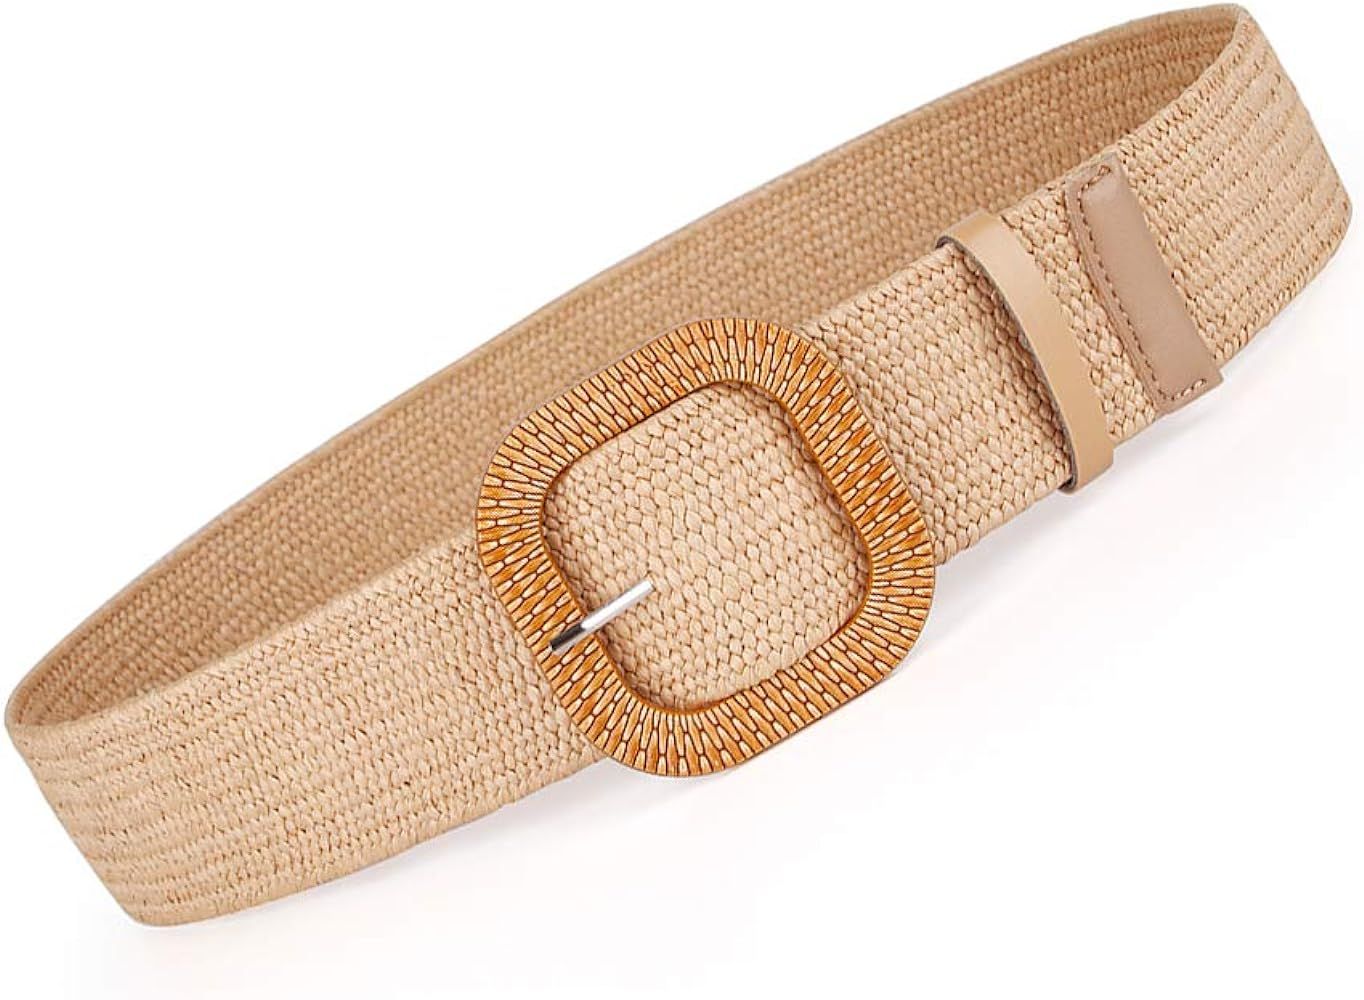 Women Belts For Dresses, Elastic Straw Rattan Waist Band With Wood Buckle | Amazon (CA)